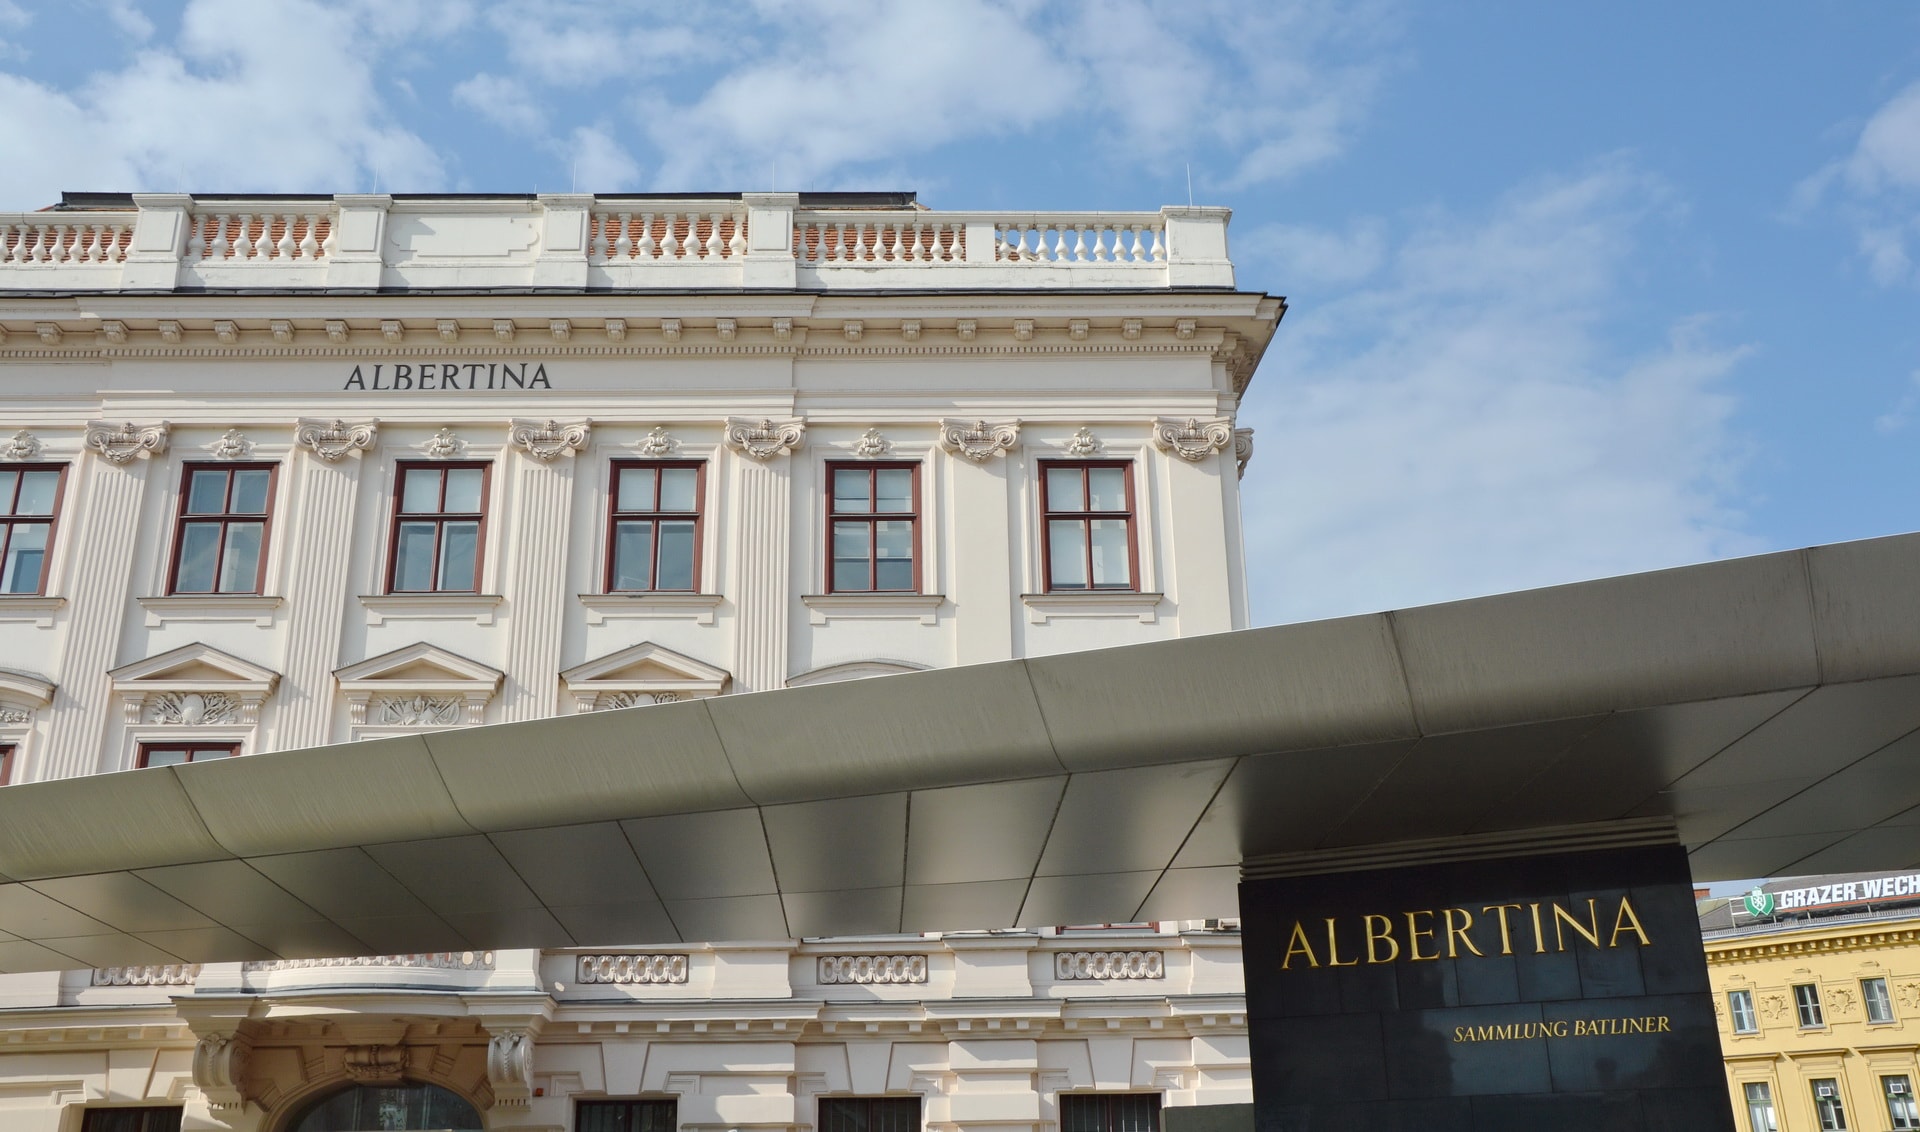 Albertina is an art gallery in Vienna, located close to the Opera